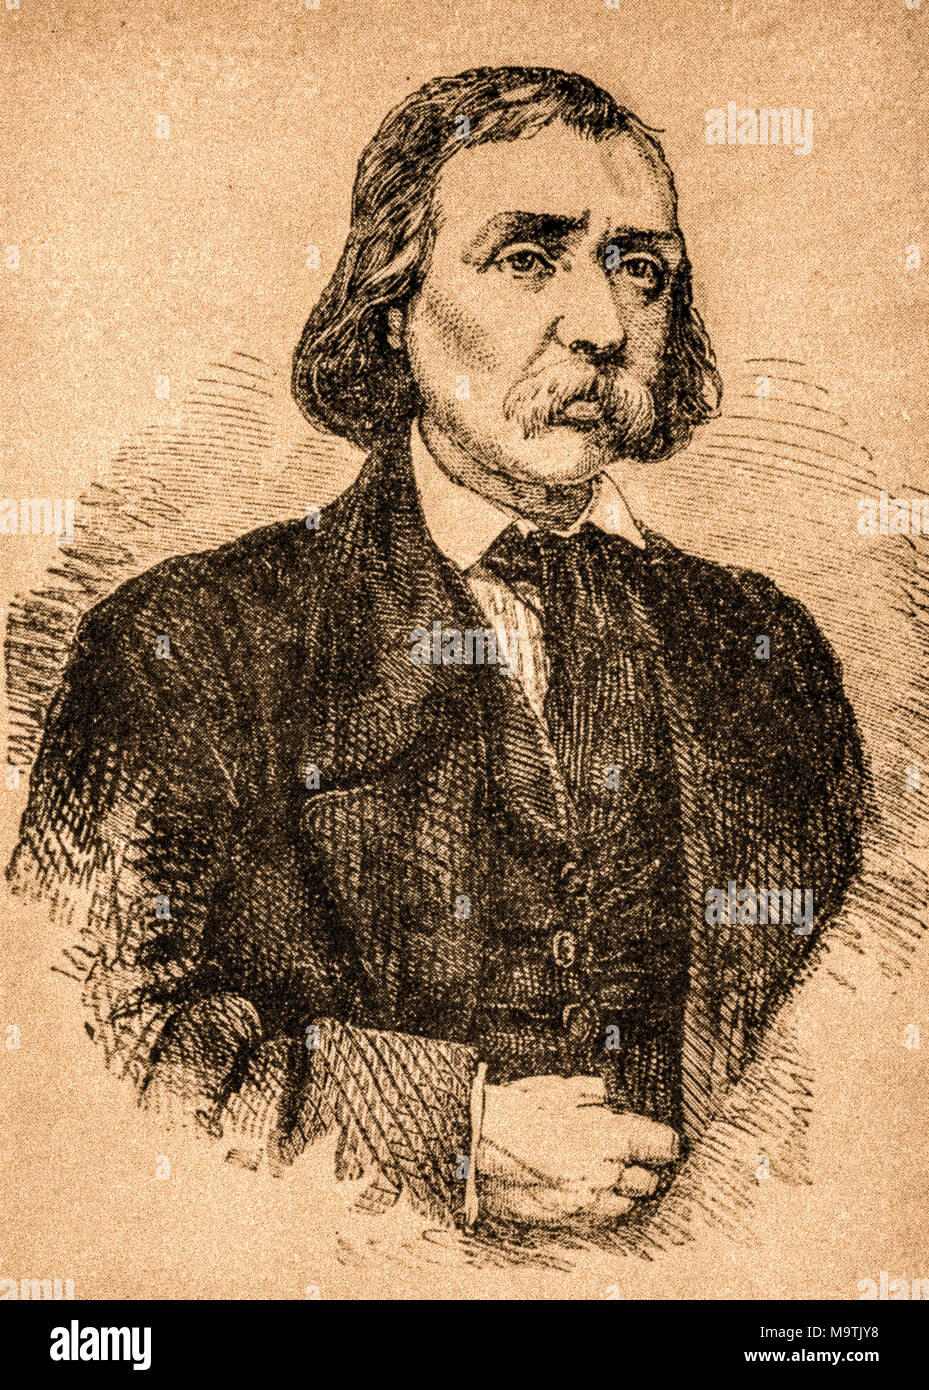 Dr. Simon FranÃ§ois Bernard, said the club-runners known for having been involved in Felice Orsini's attempt to assassinate the French emperor Napoleon III. Stock Photo